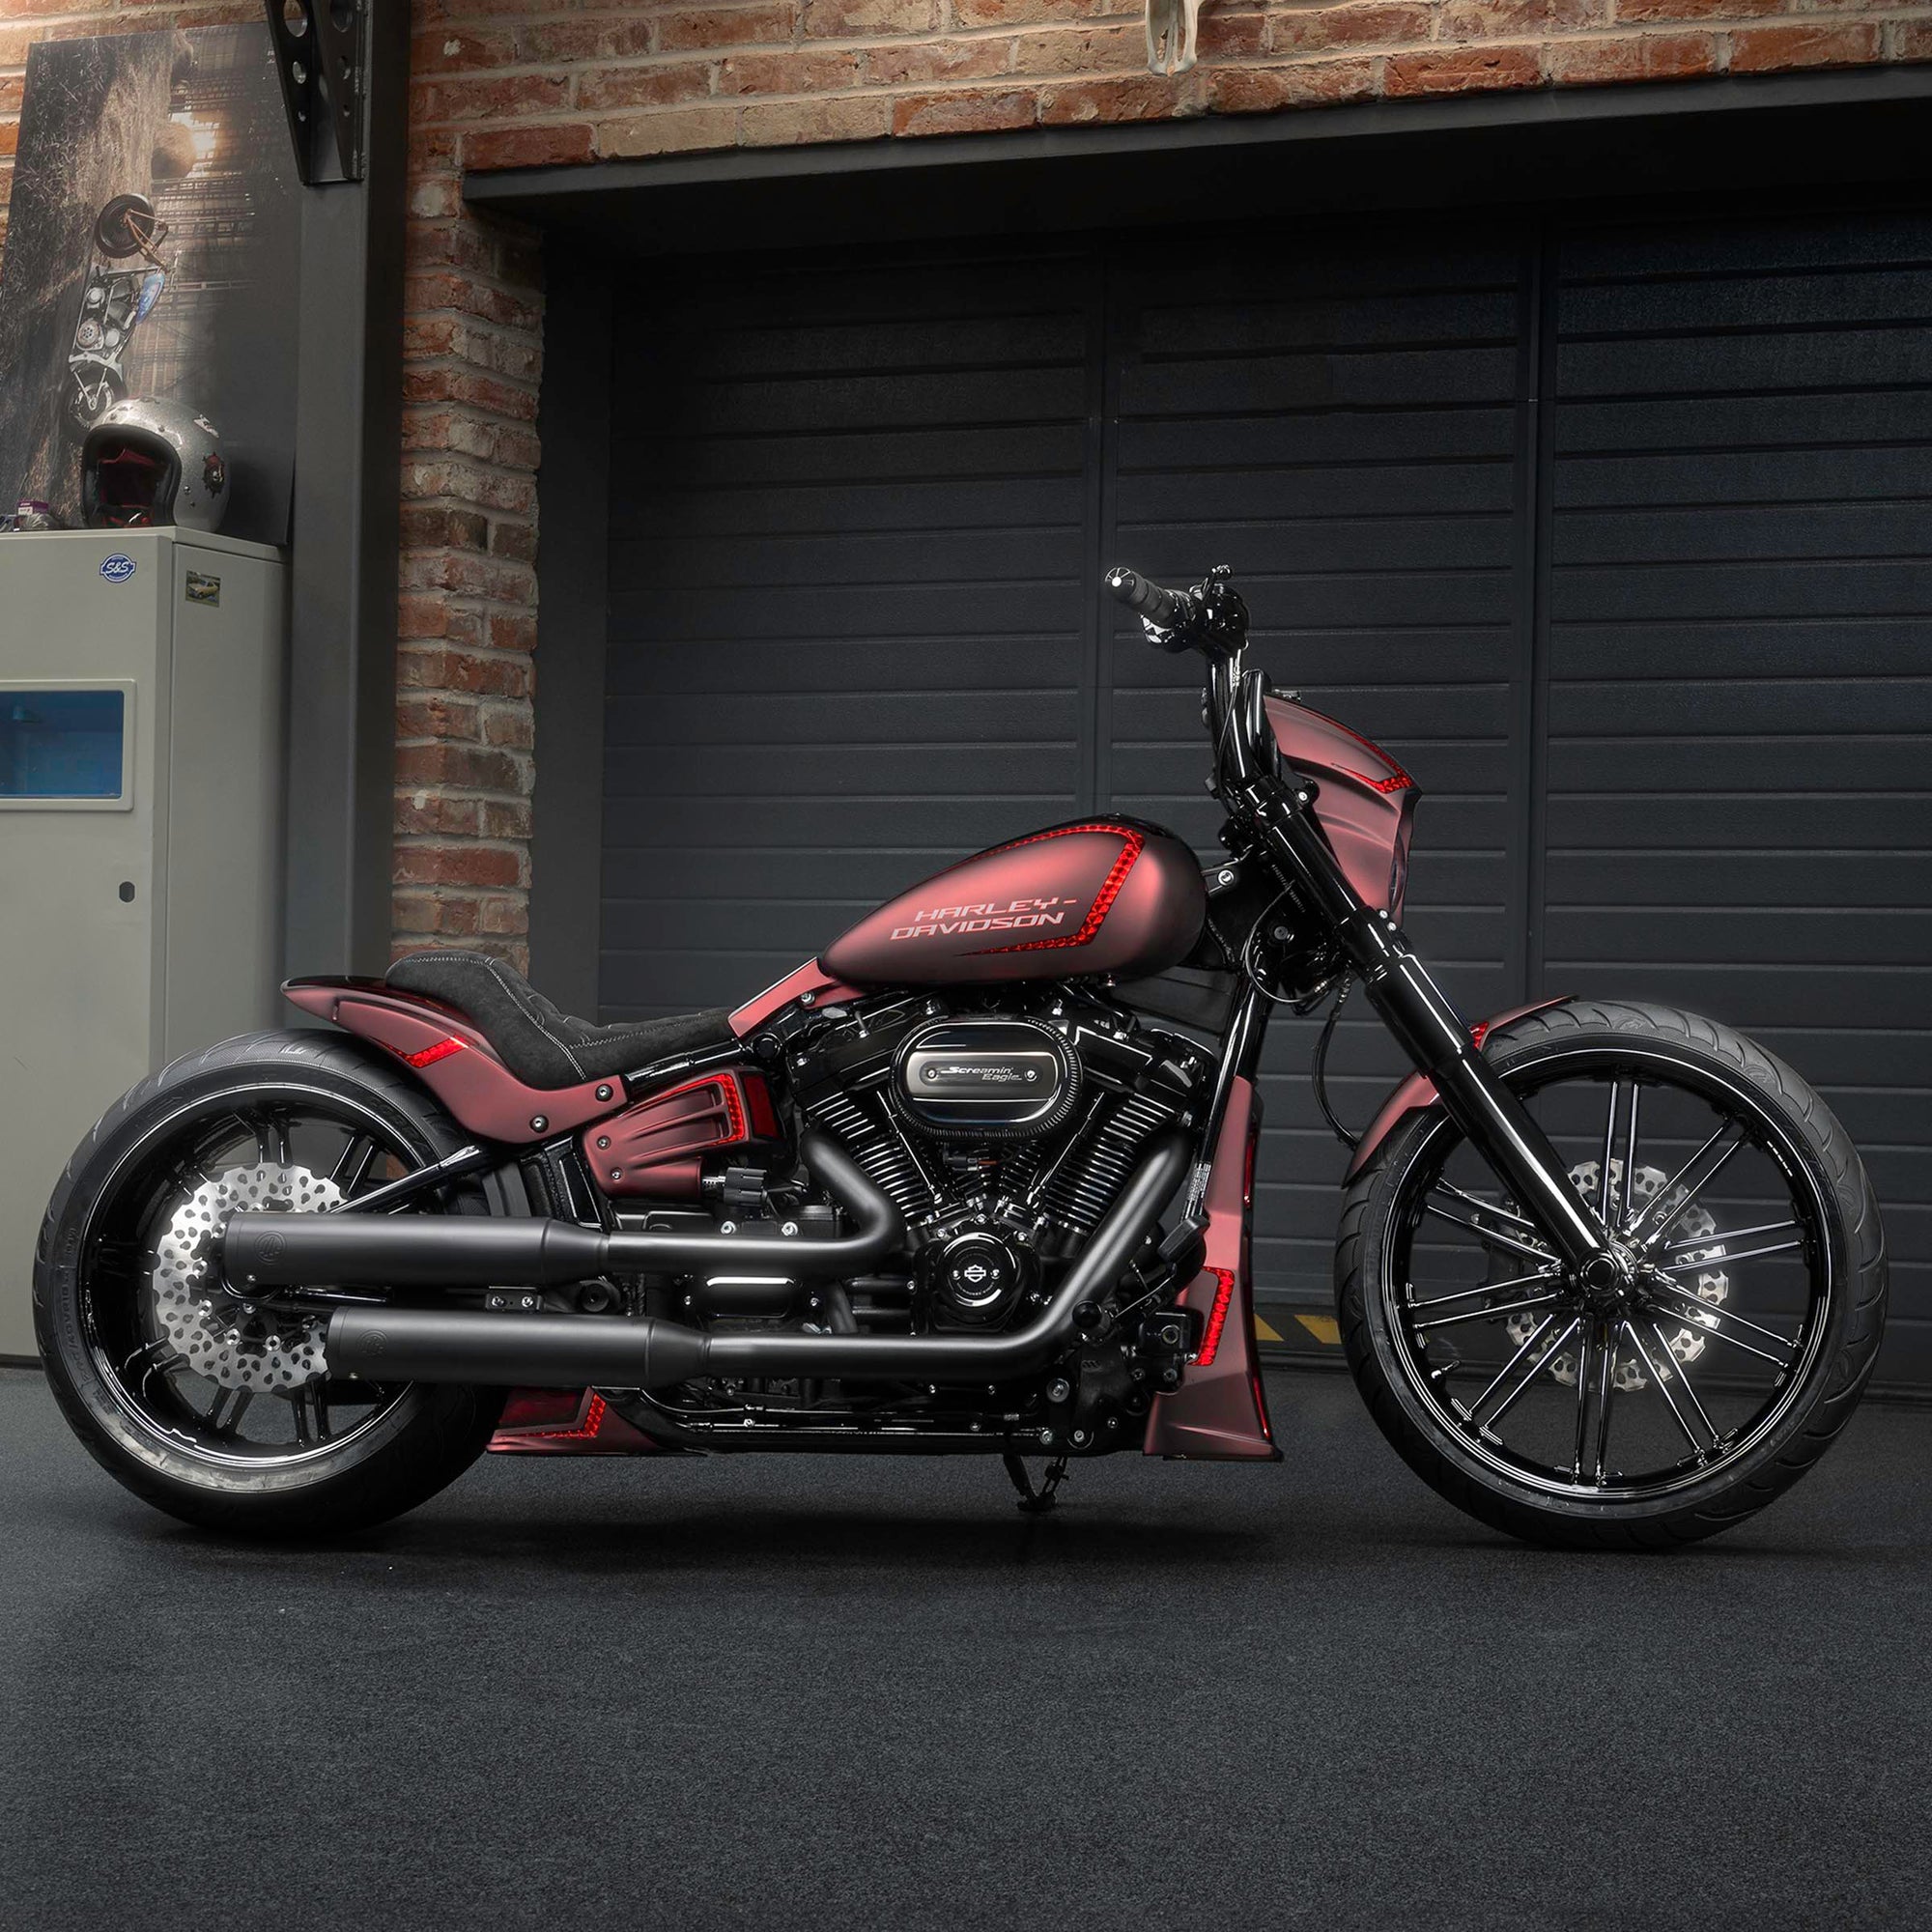 Modified Harley Davidson Breakout motorcycle with Killer Custom parts from the side in a modern garage